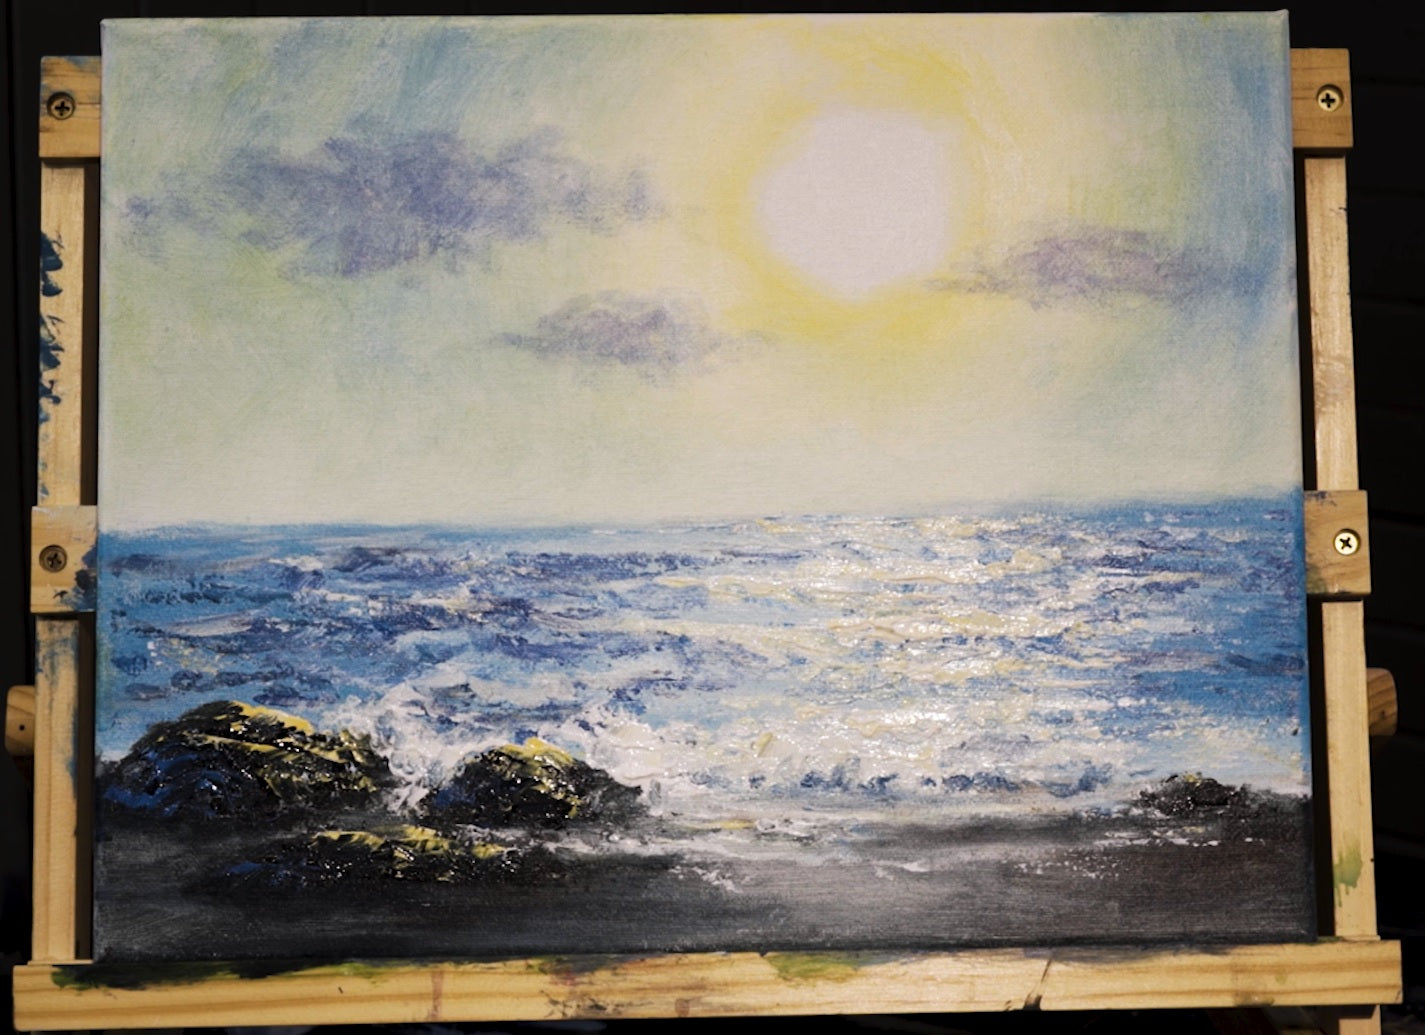 Painting Lesson Video Download - Seascape